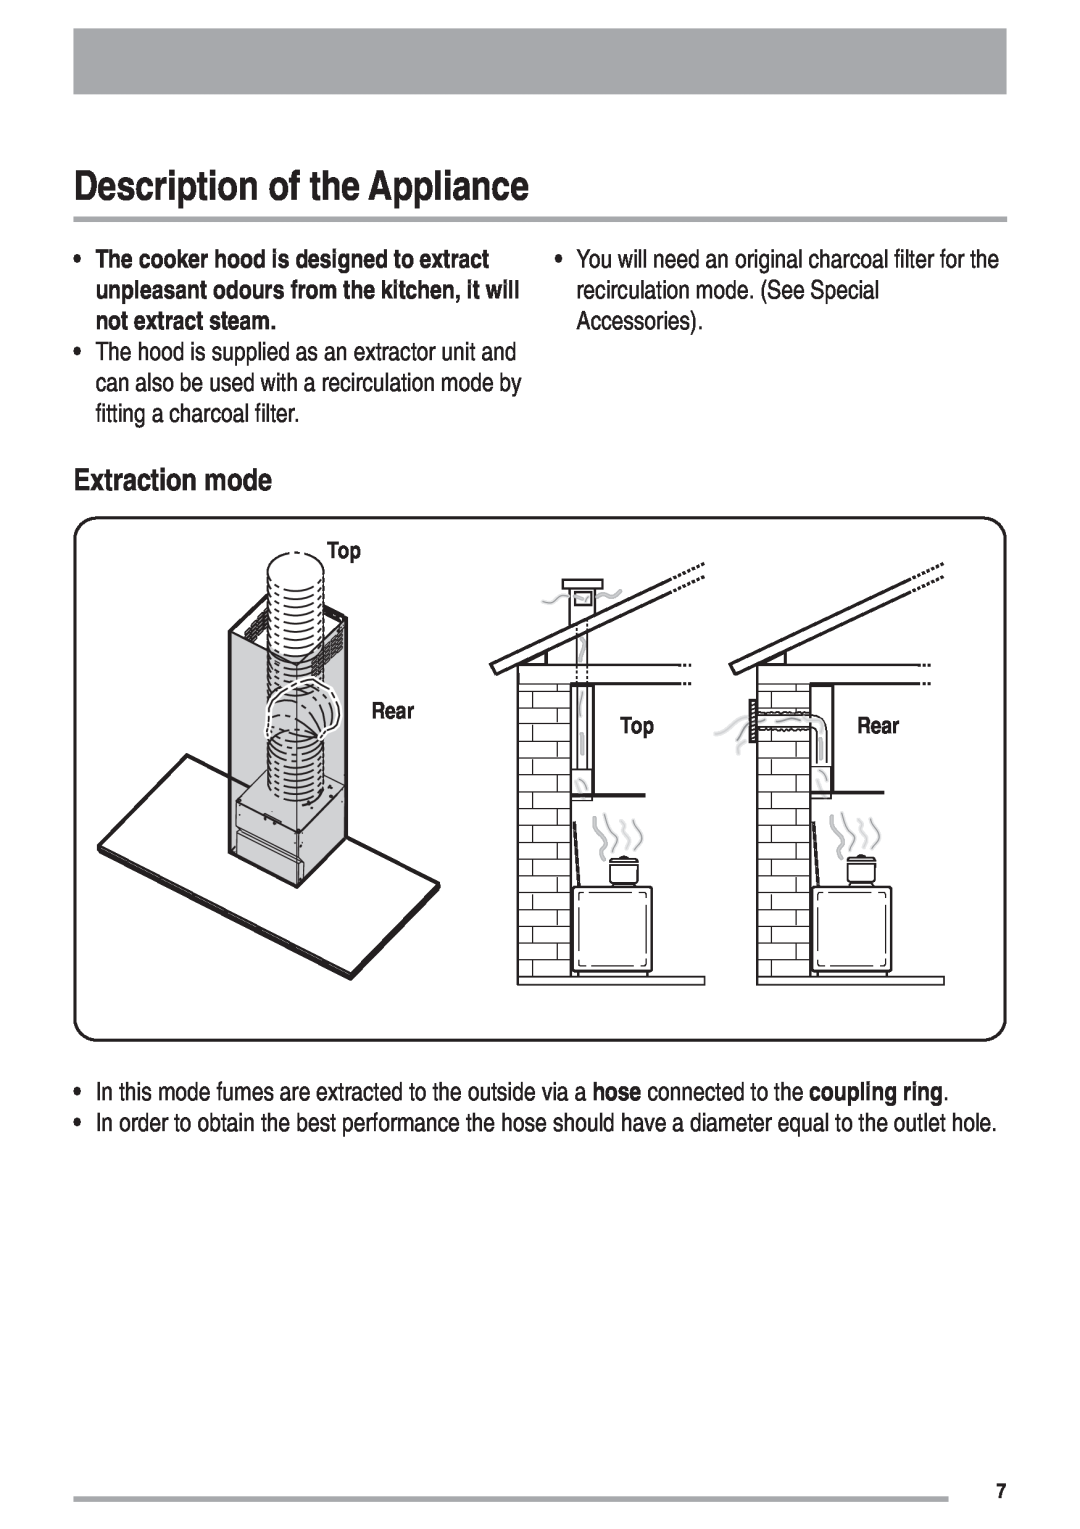 Zanussi ZHC 9254X Description of the Appliance, Extraction mode, not extract steam, The cooker hood is designed to extract 